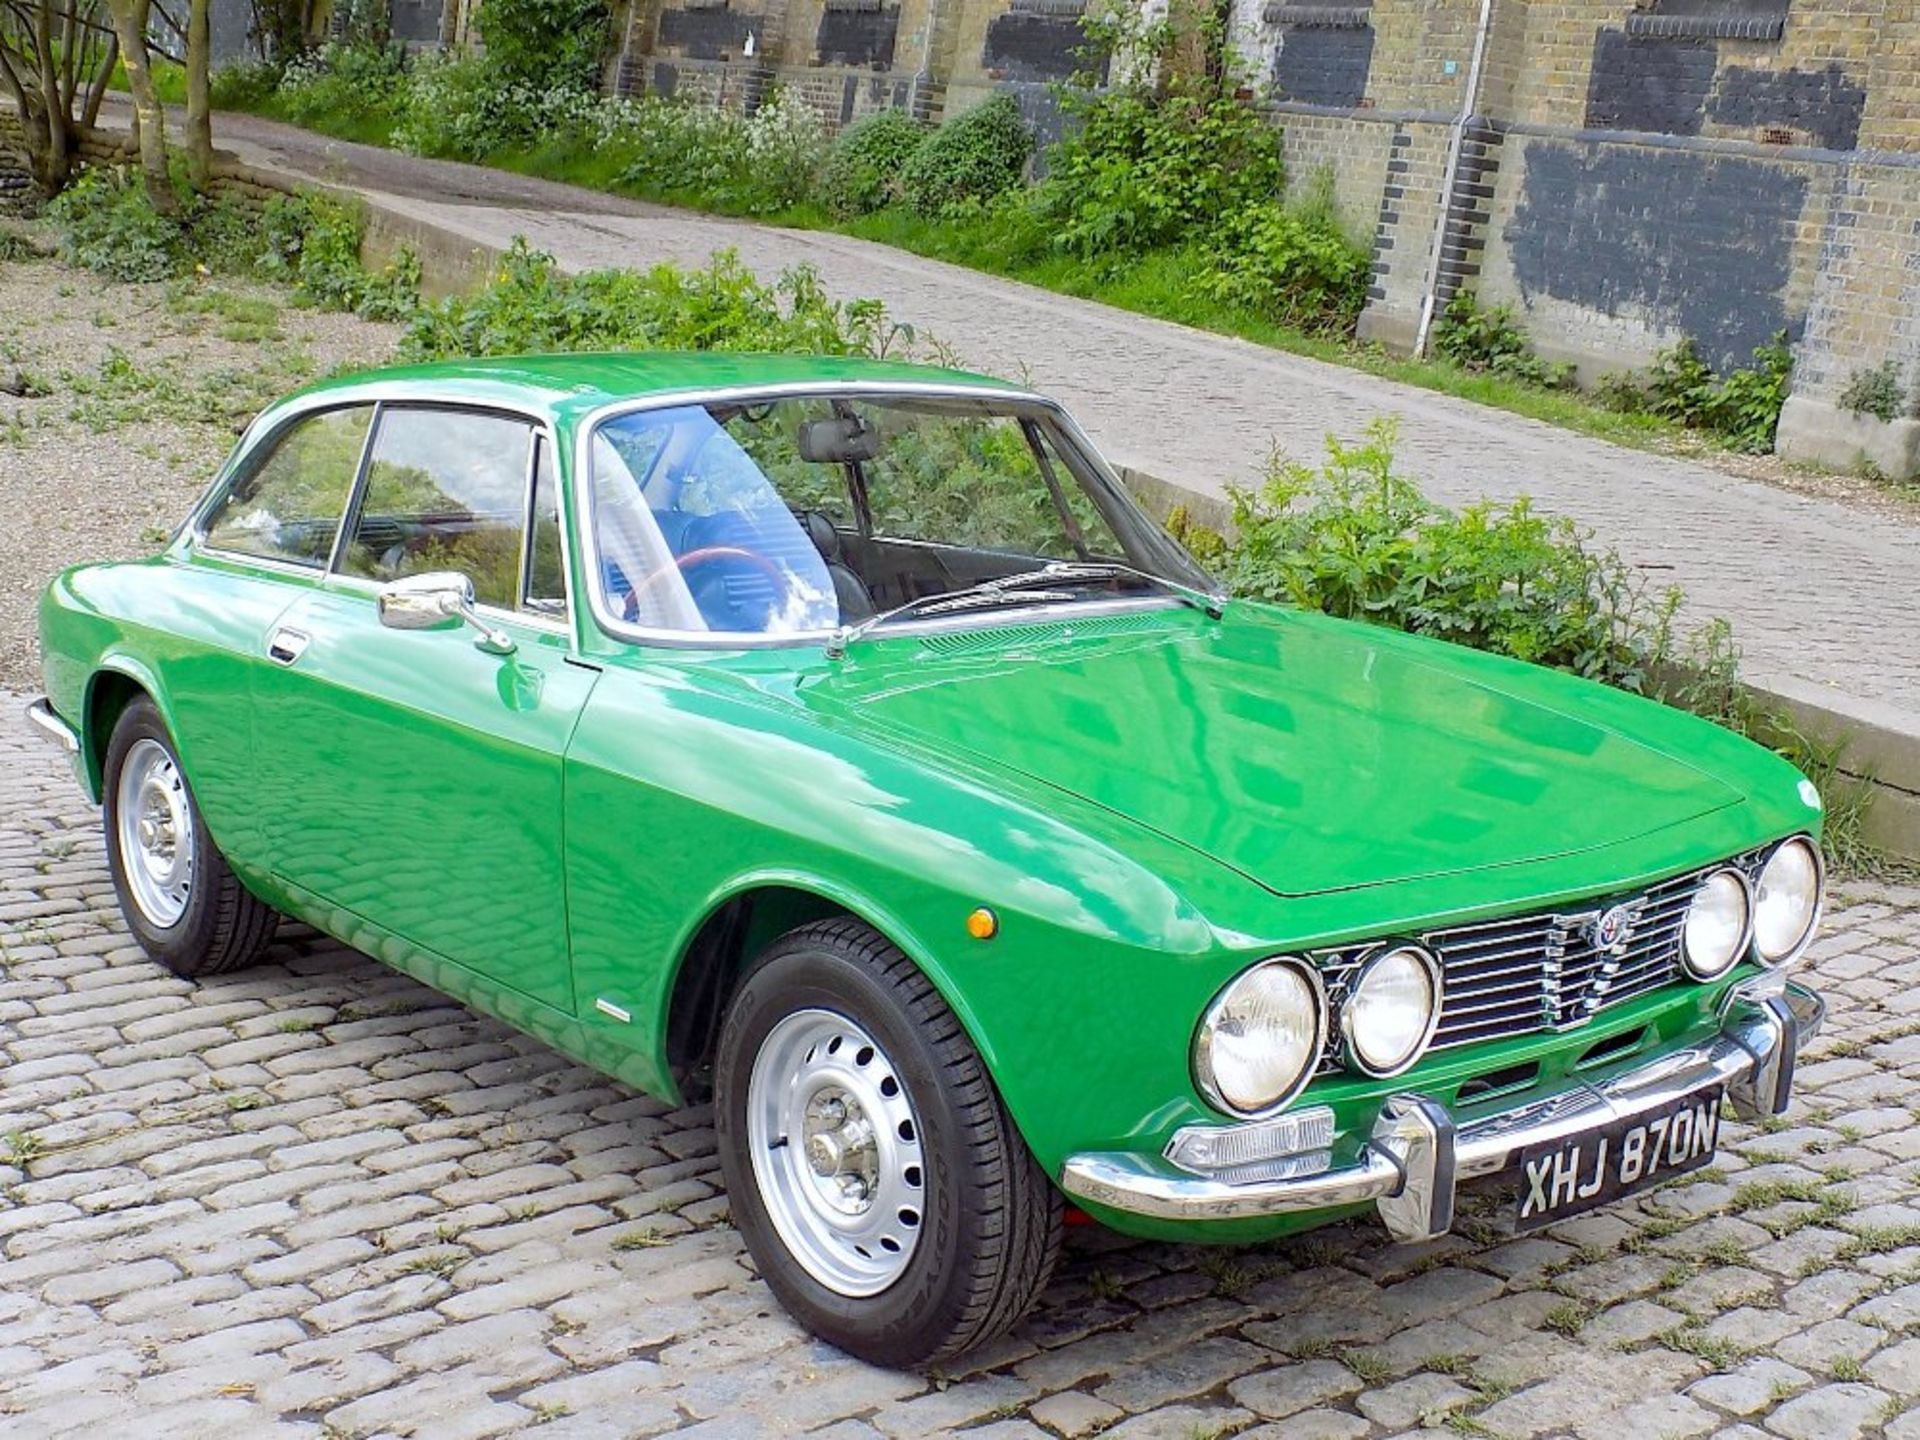 1975 ALFA-ROMEO 2000 GTV Registration Number: XHJ870N Chassis Number: AR.2417350 Recorded Mileage: